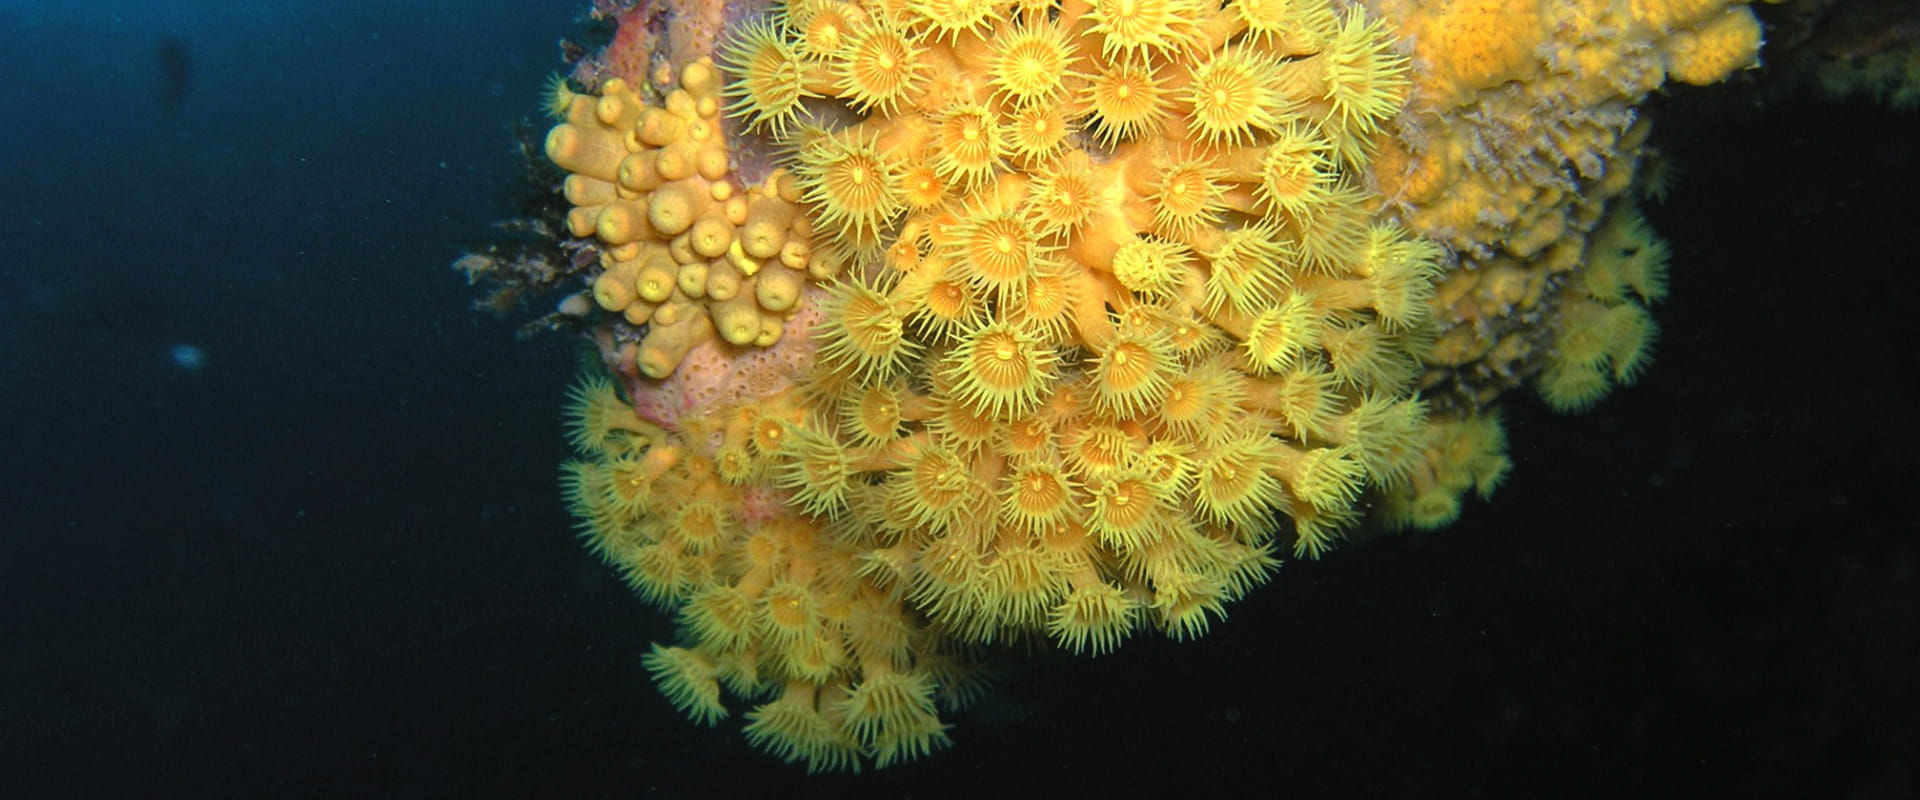 A brilliant underwater display of bright yellow sea anemones covering a large rocky formation.